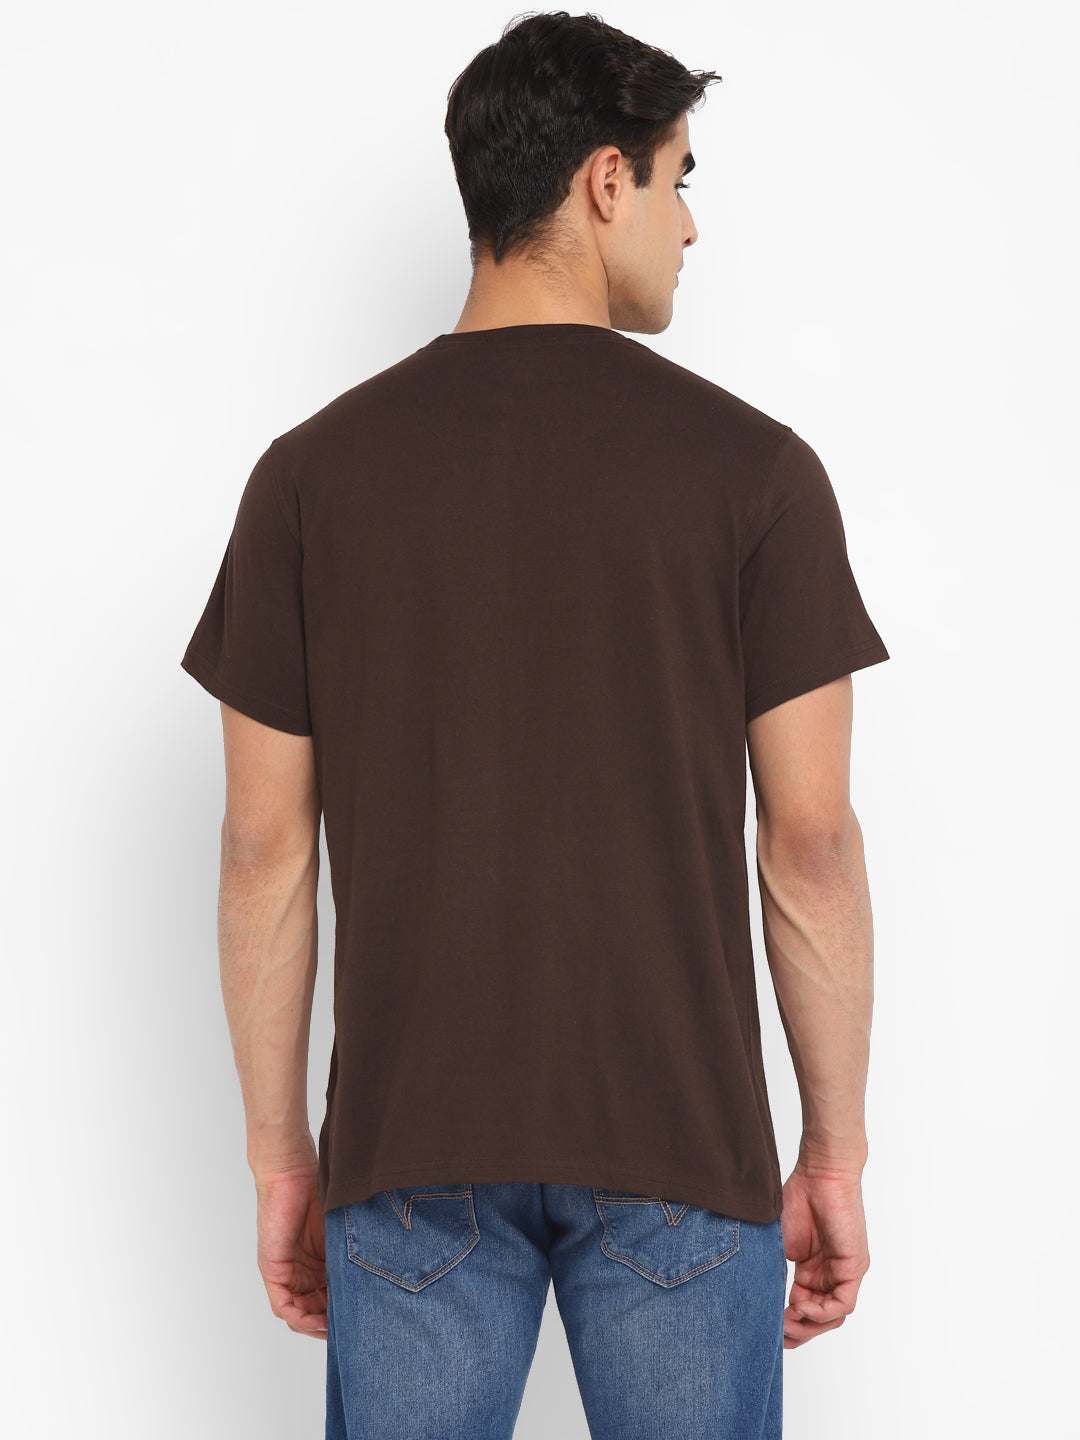 Printed Round Neck T-Shirt For Men - Coffee Brown